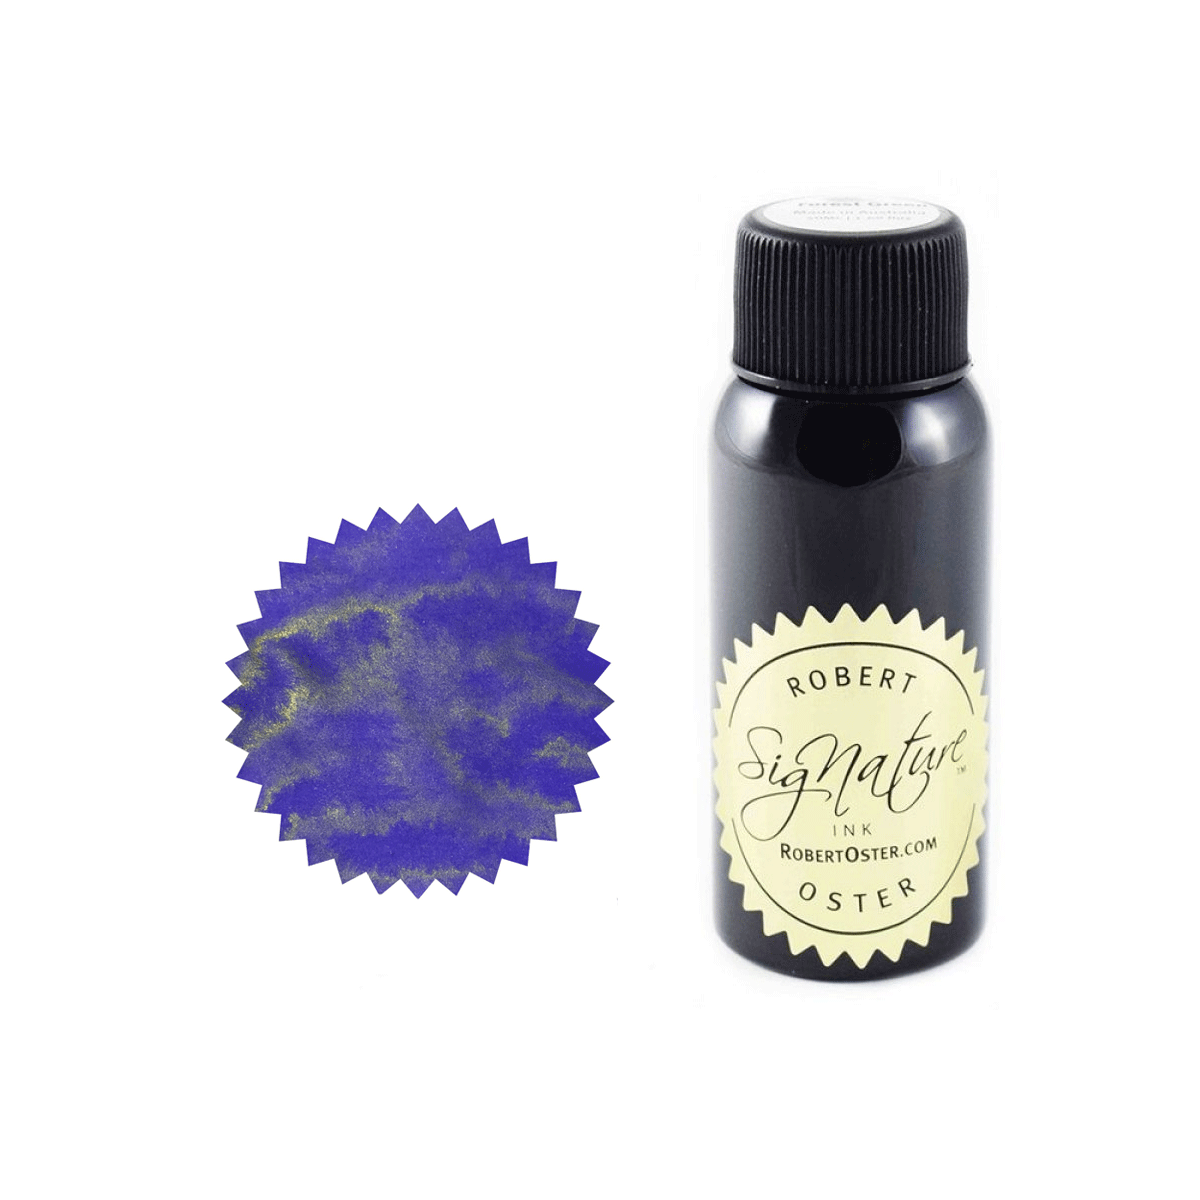 Robert Oster Signature Ink Bottle Cosmic Swirl - Pencraft the boutique